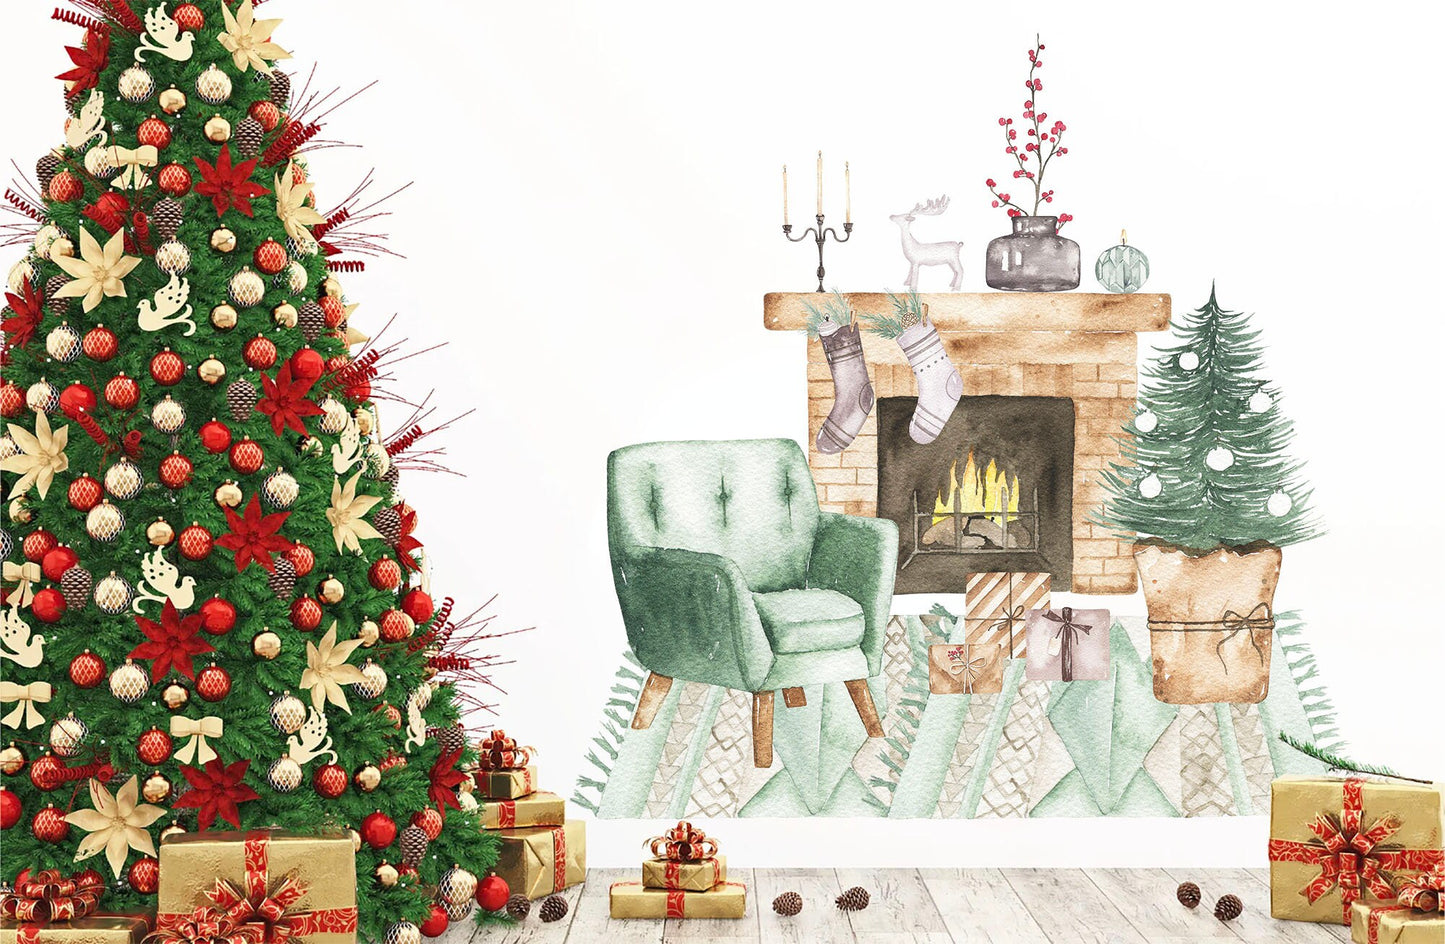 Christmas Scene Fireplace and Tables with Chairs Wall Decal - BR047